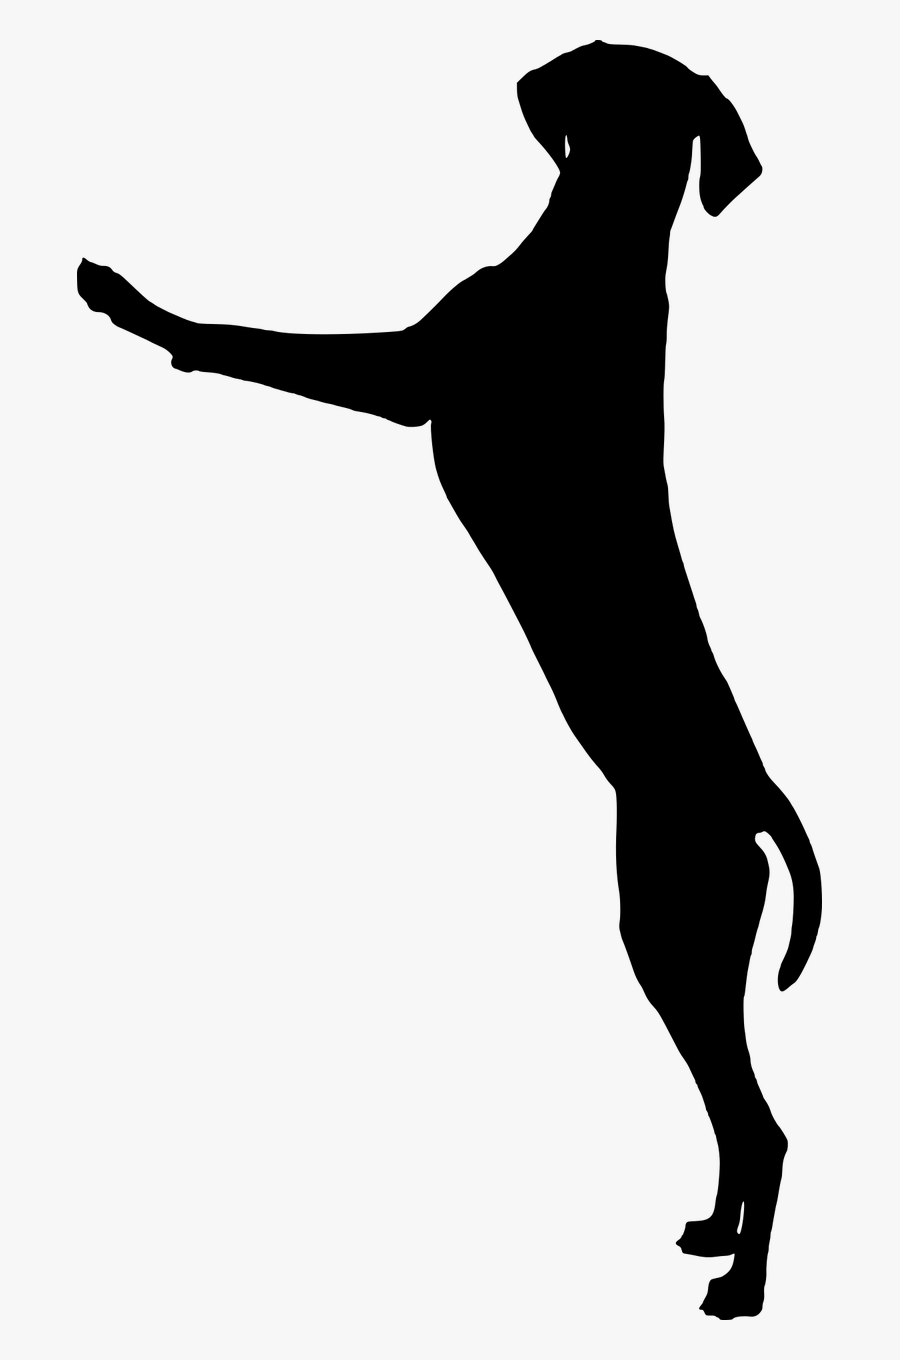 Dog, Dog, Standing, Playing, Silhouette - Great Dane Jumping Silhouette, Transparent Clipart